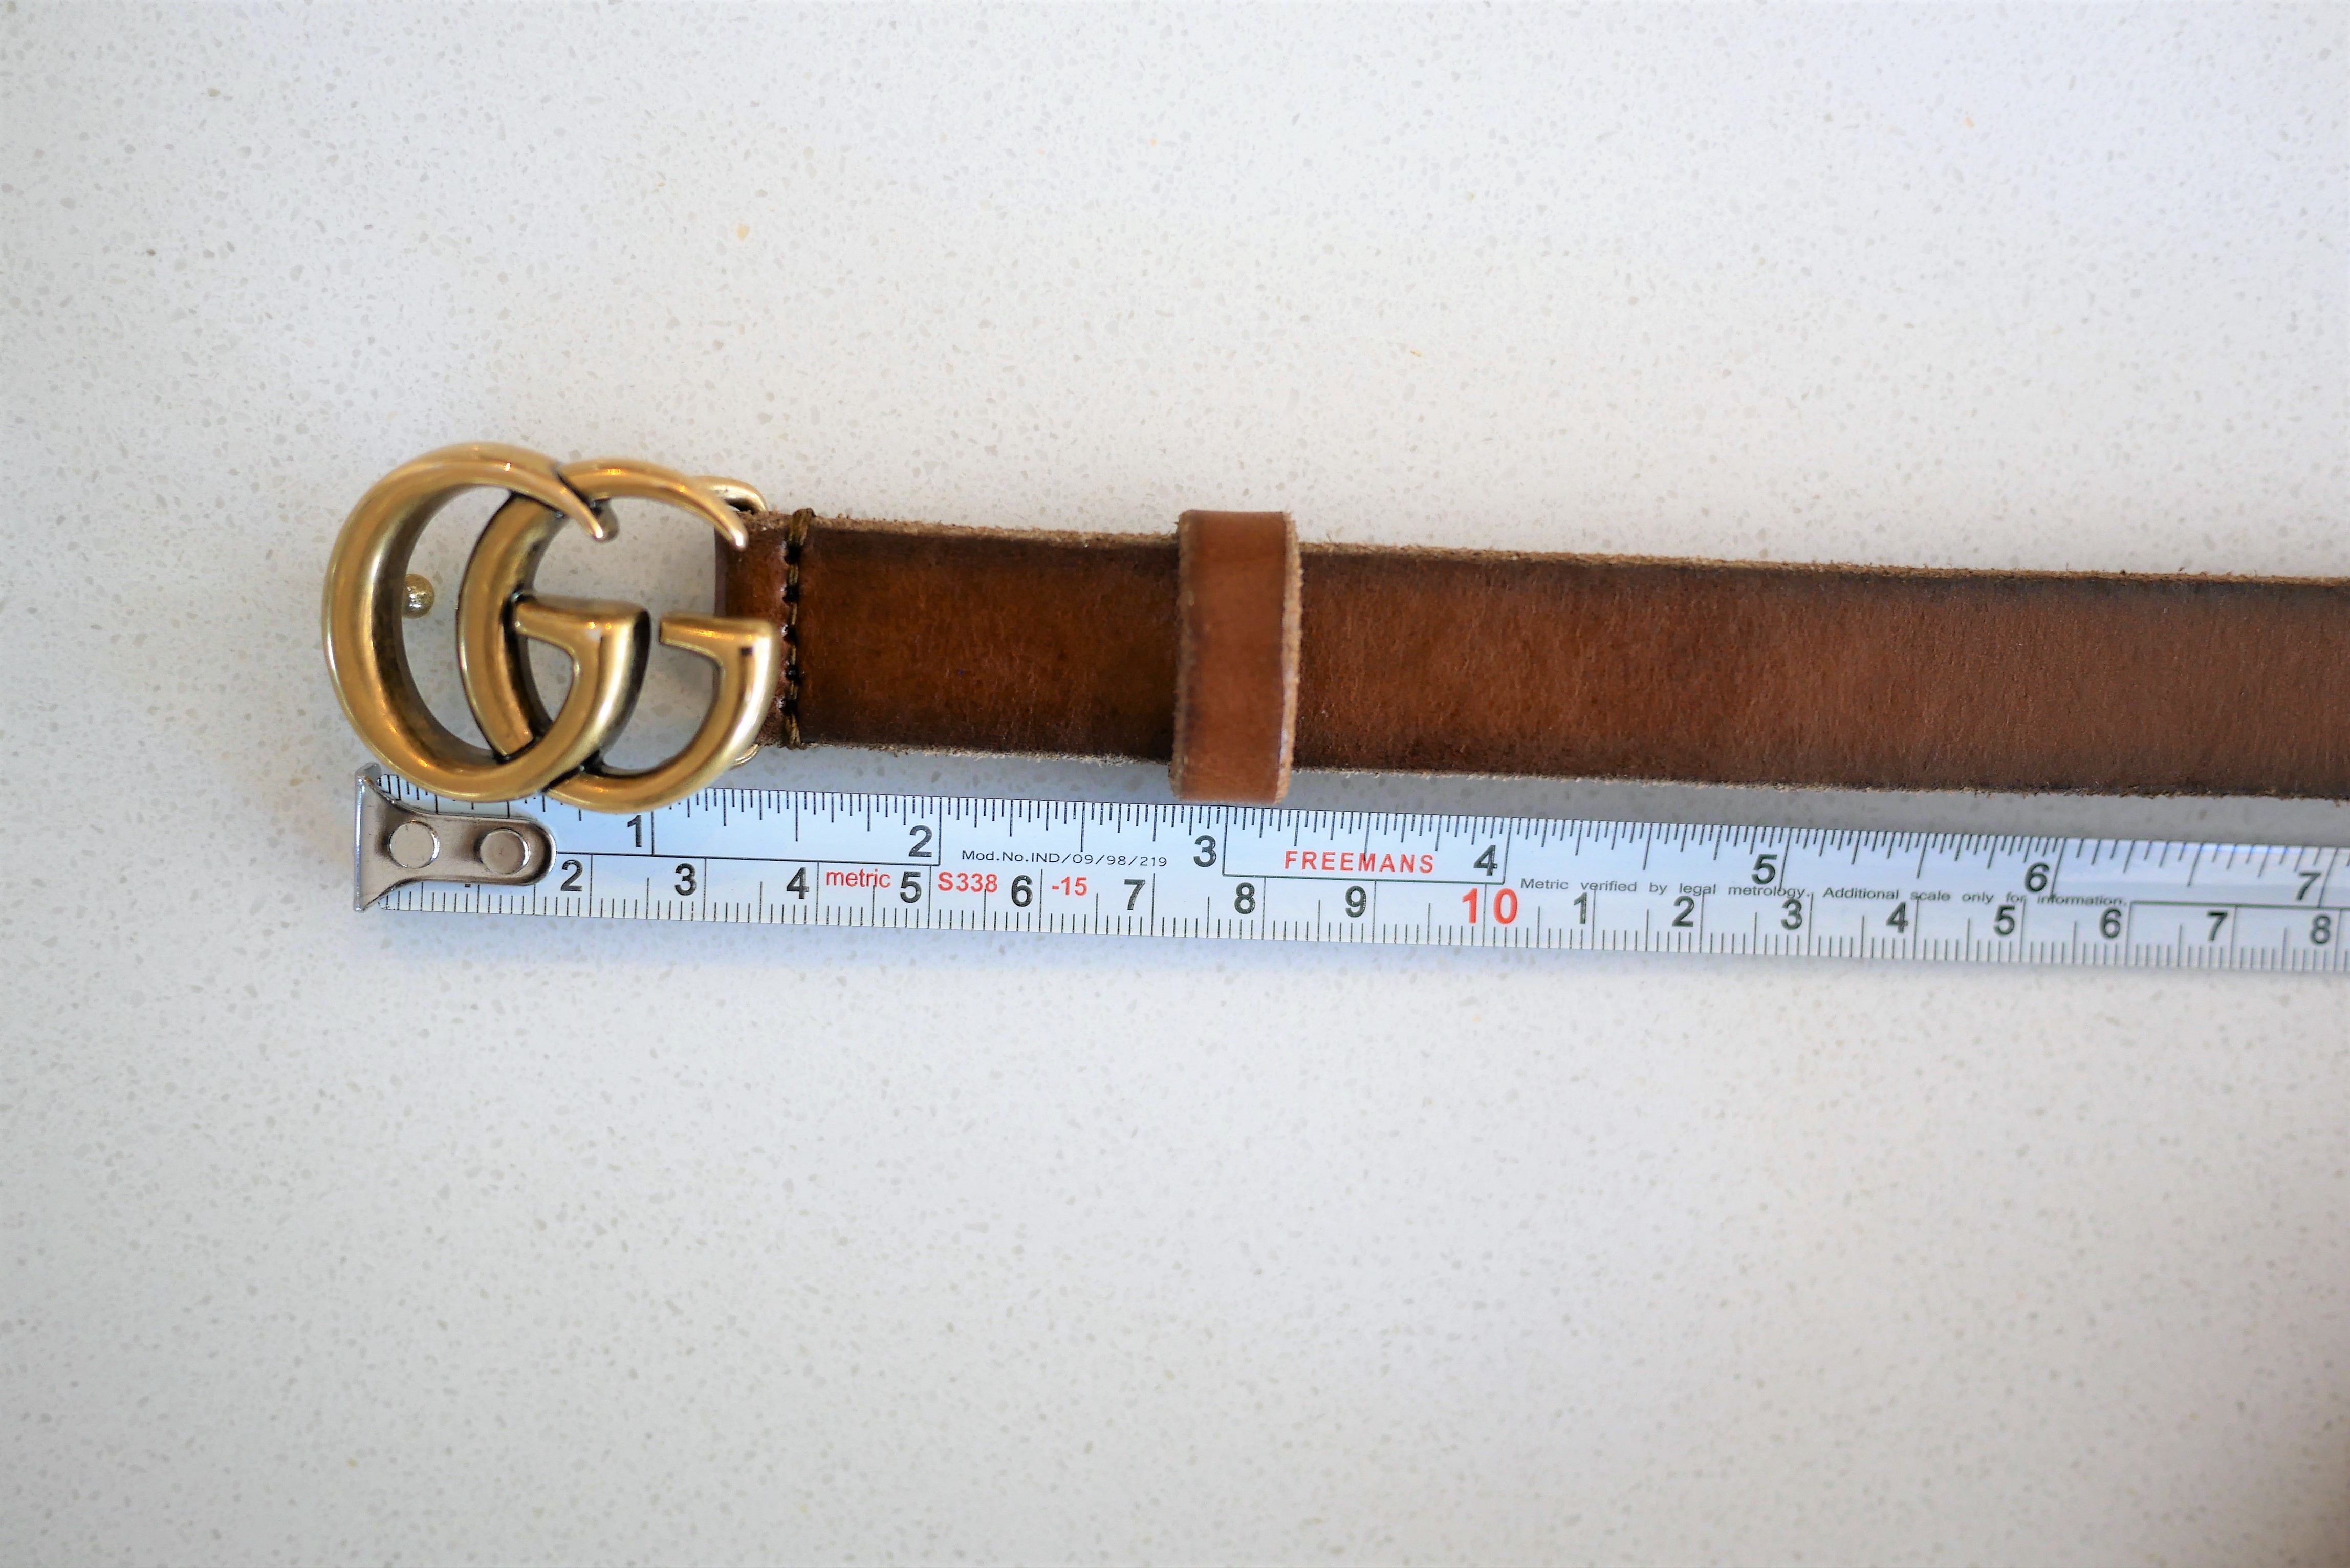 Gucci Marmont belt review/how to measure for a Euro size belt | chicibiki